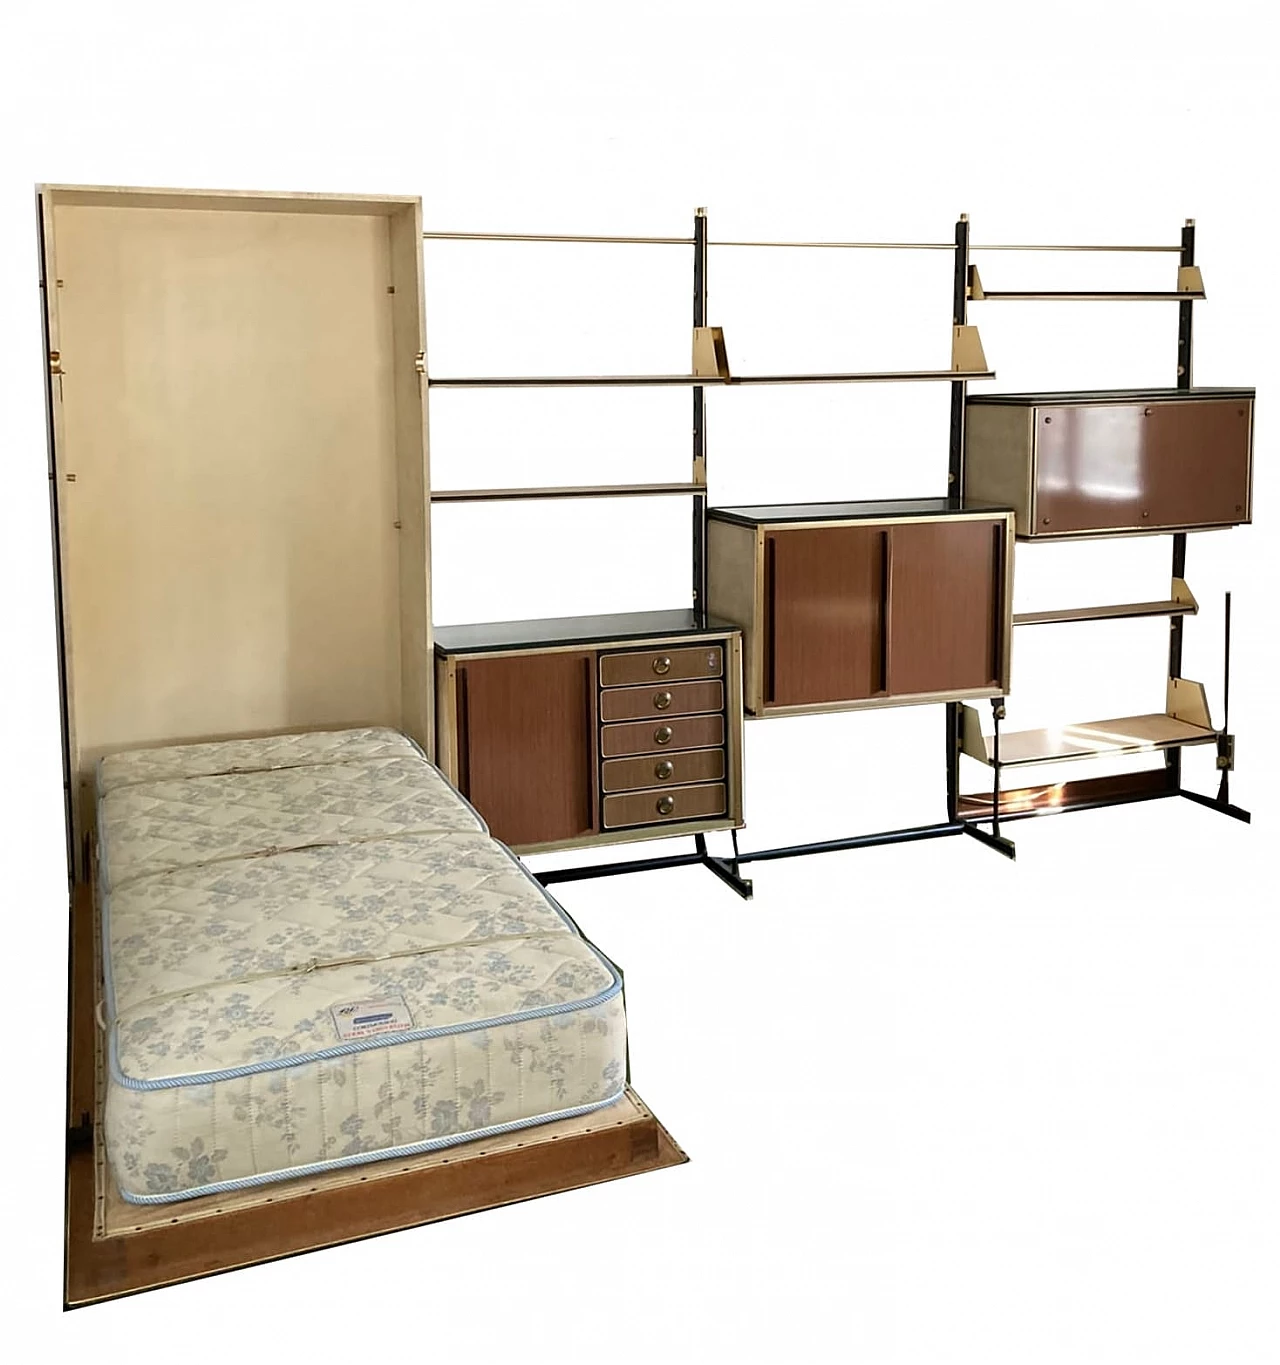 Modular bookcase and foldaway bed by Umberto Mascagni, 1950s 4